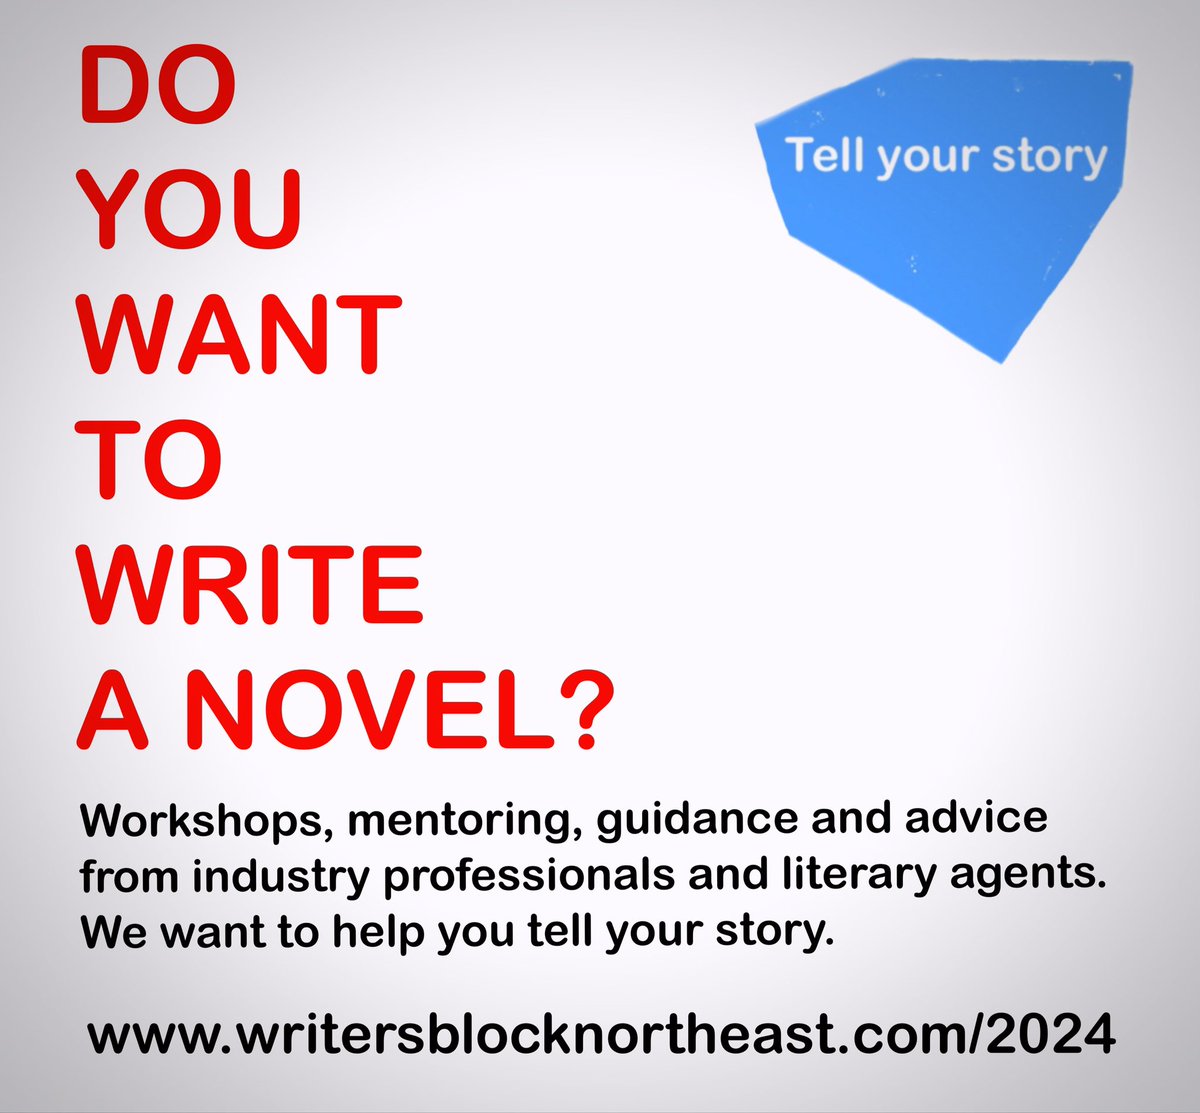 DO YOU WANT TO WRITE A NOVEL? WRITERS’ BLOCK offer a year-long programme of workshops, mentoring, author masterclasses and meetings with agents There are 14 places, including 4 reserved for working class writers. Apply here: writersblocknortheast.com/2024